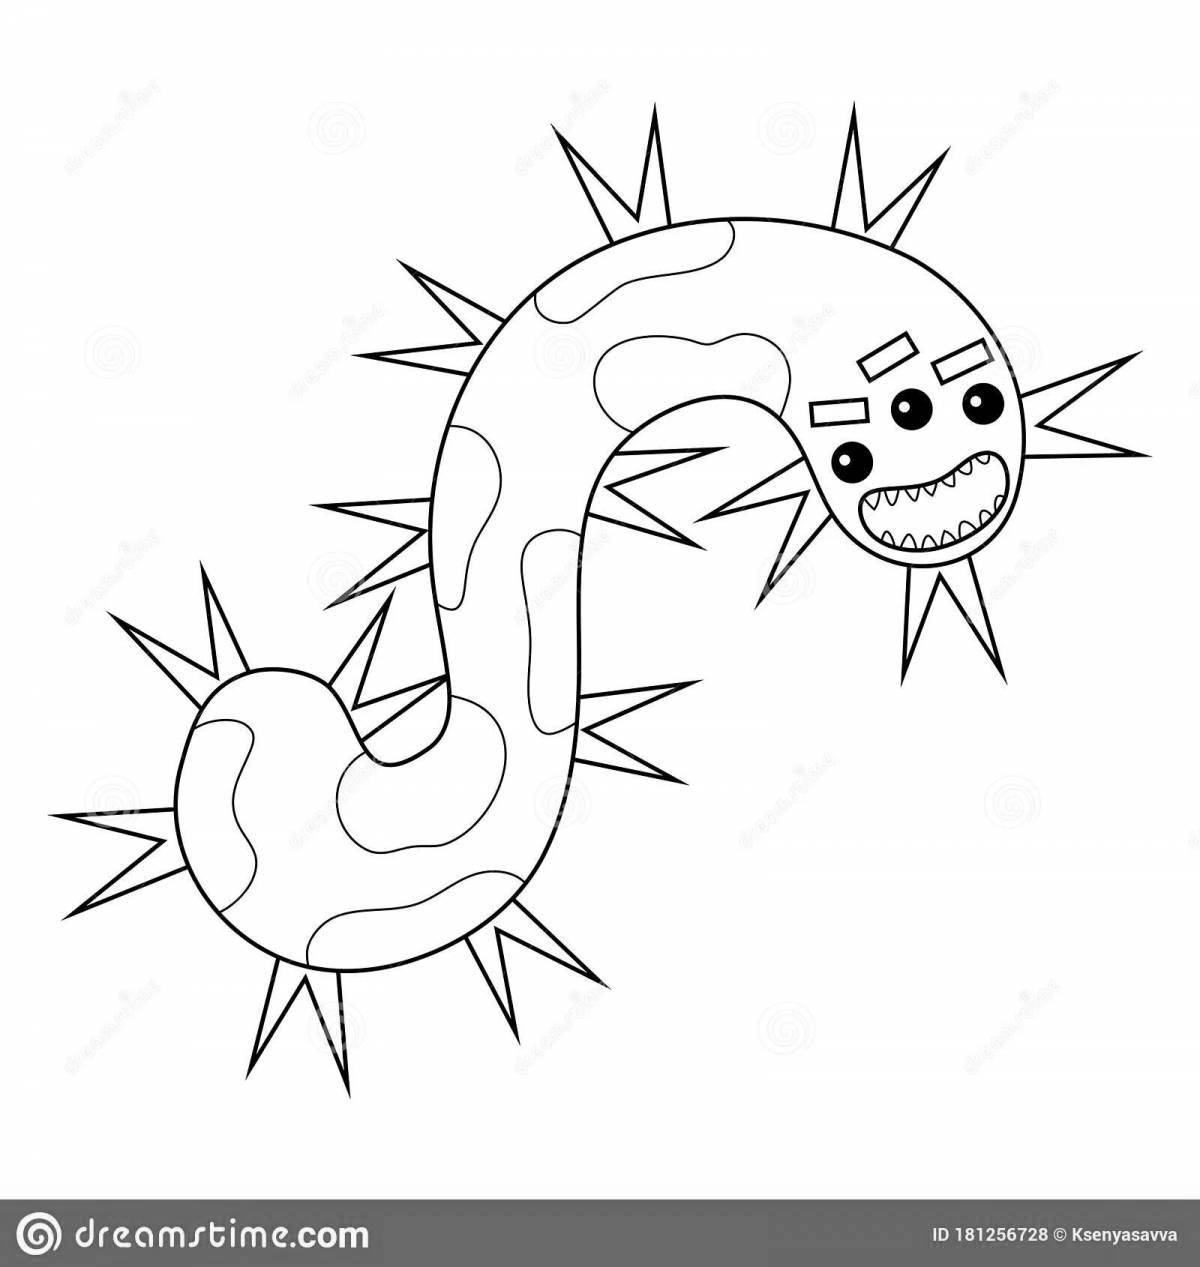 Coloring page magical microbes and bacteria